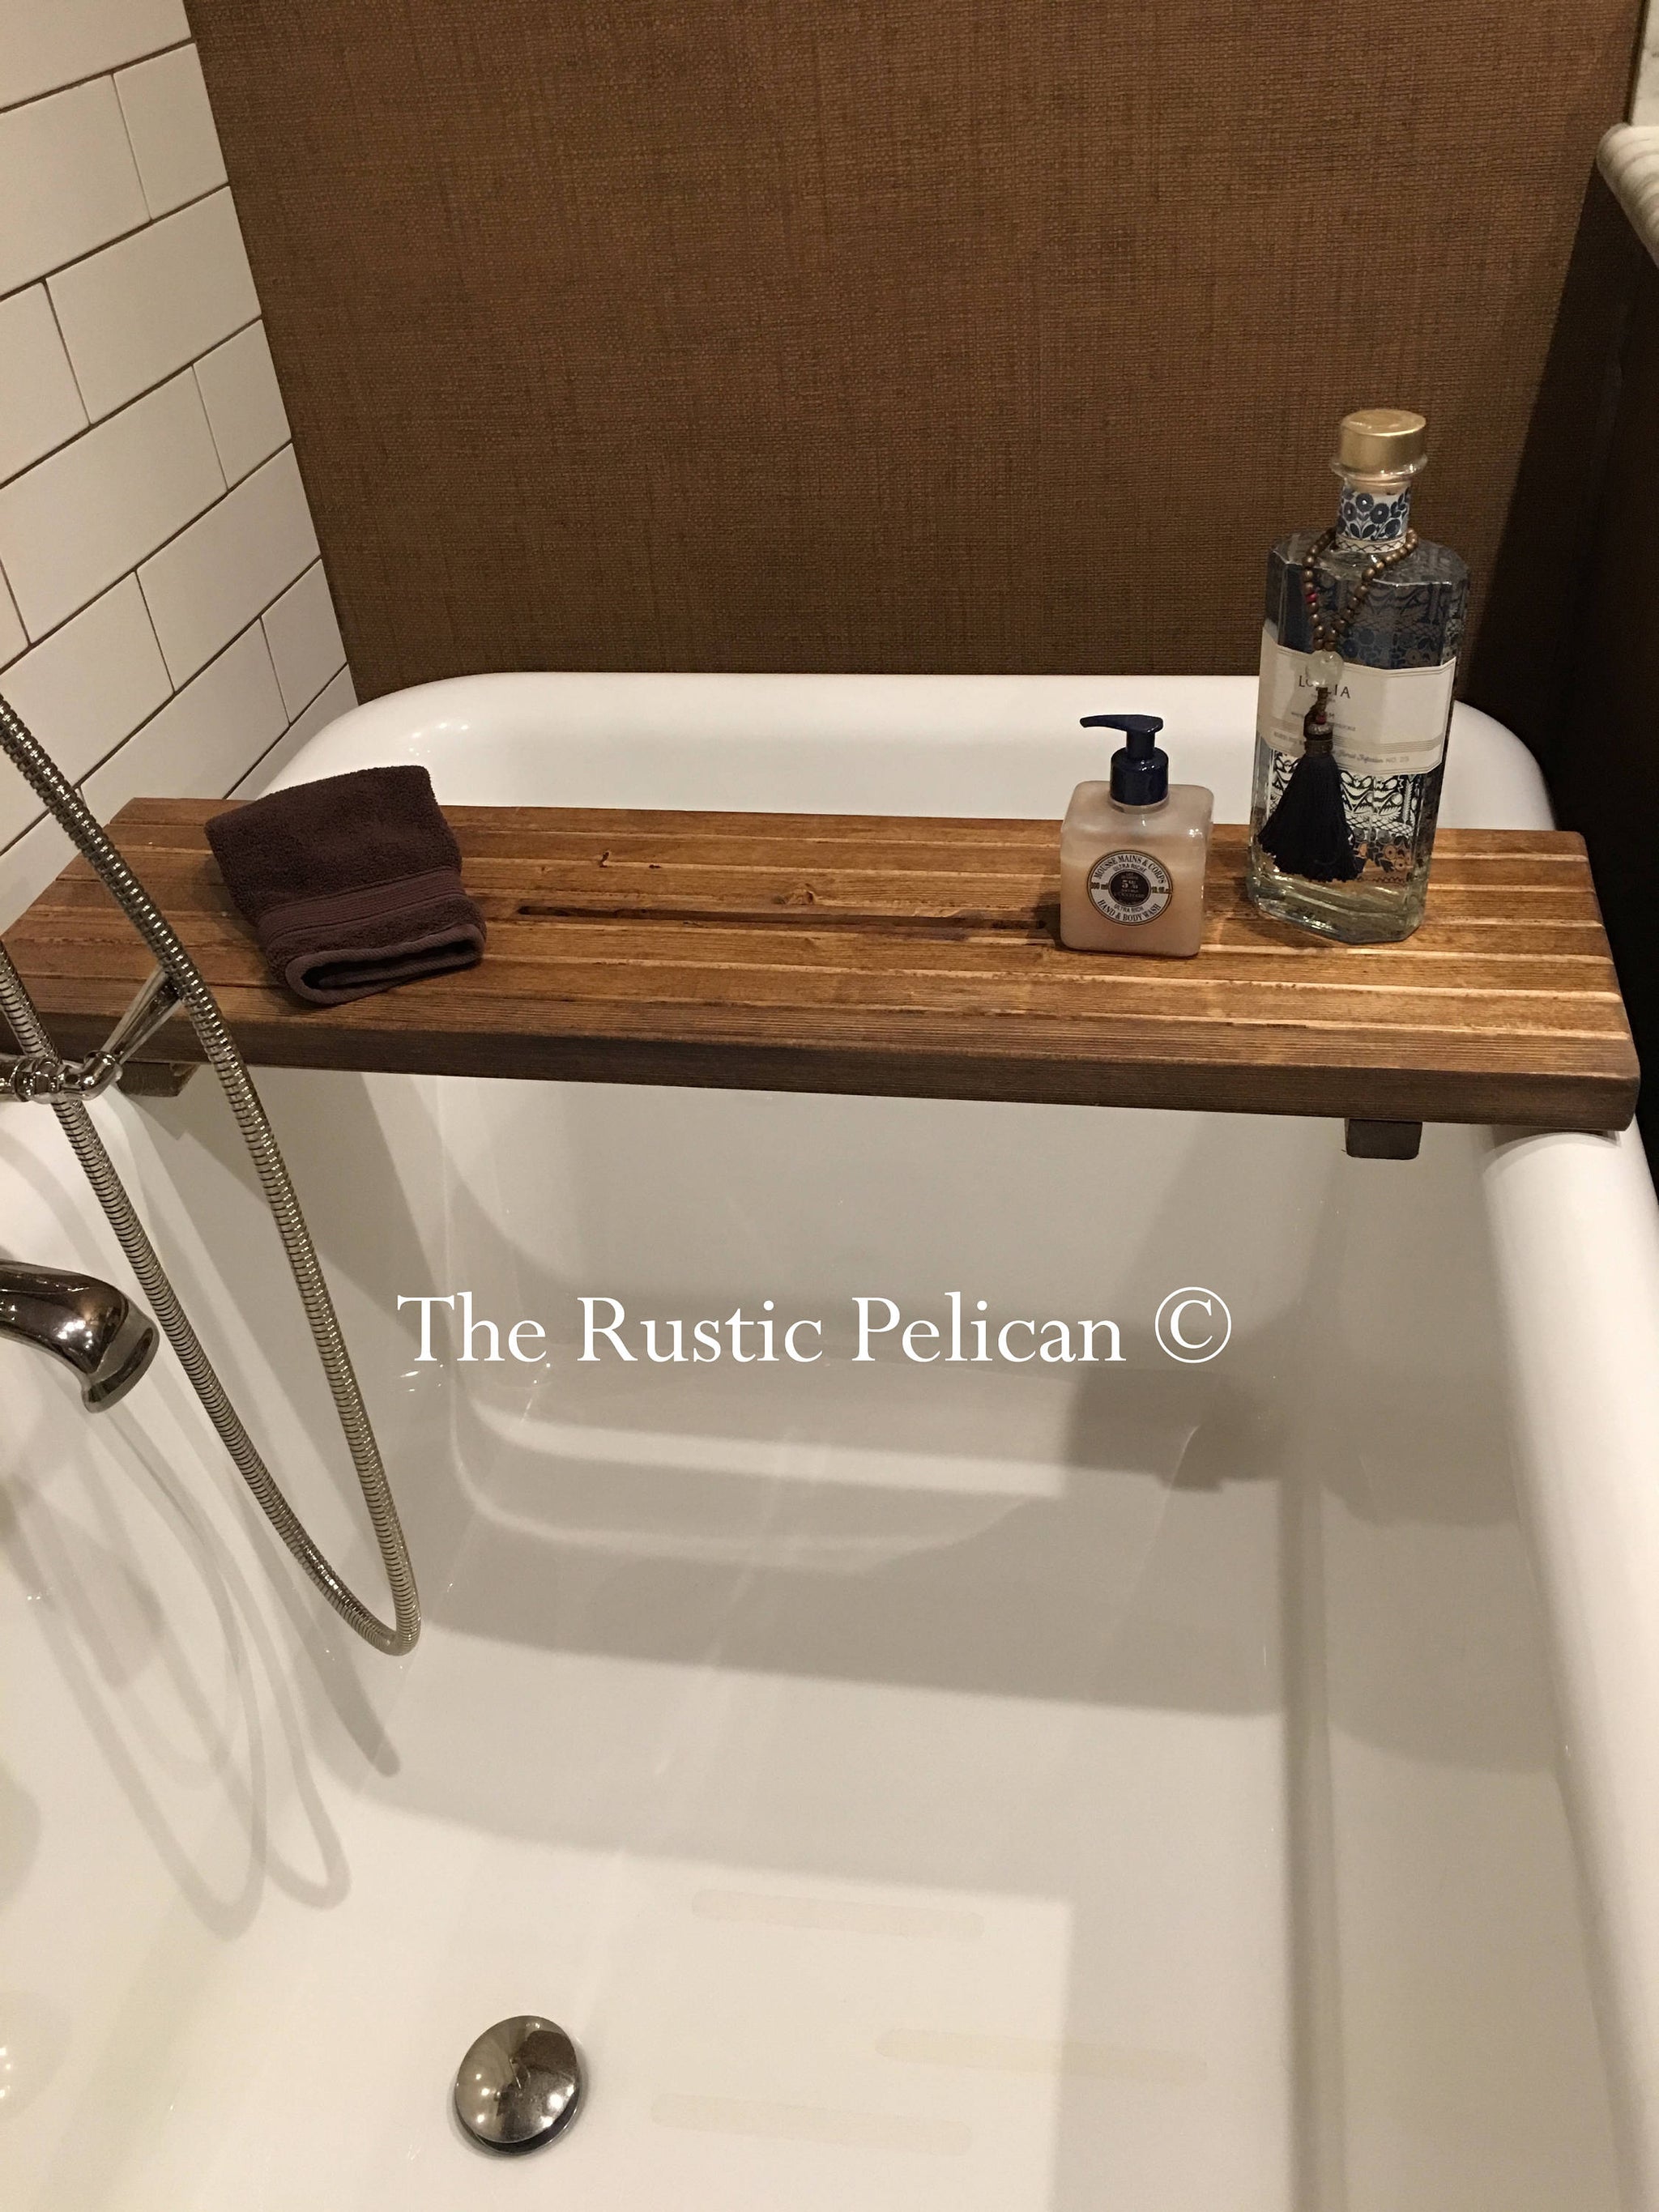 Peg and Awl Reclaimed Wood Tub Caddy Tray, Fits Standard Tub on Food52